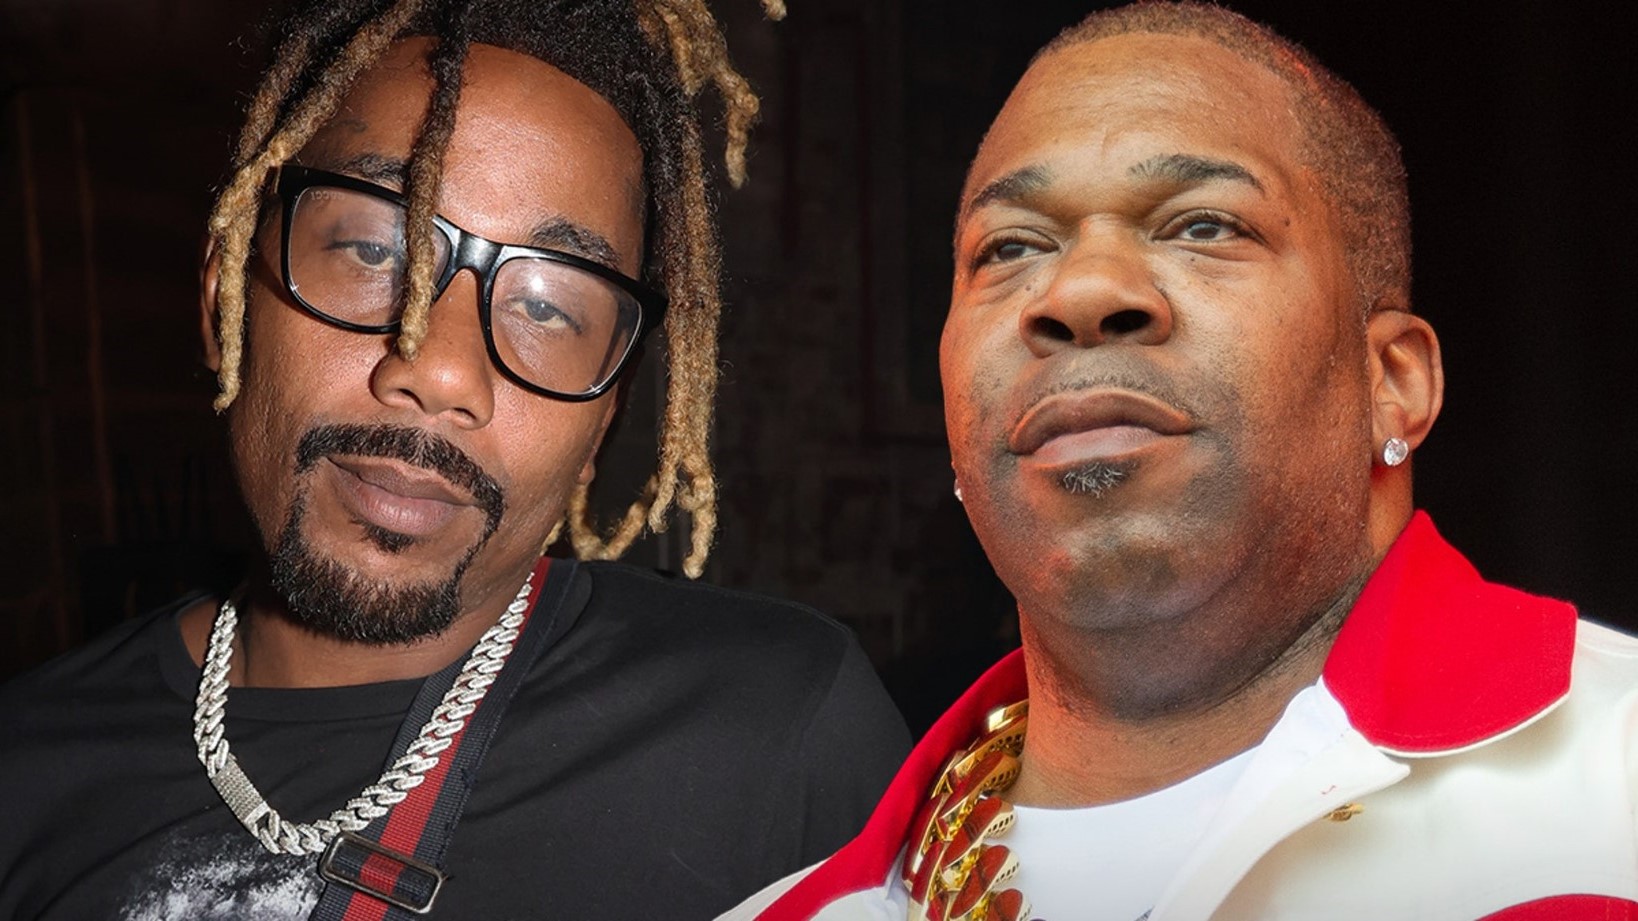 Busta Rhymes Involved In Altercation With Rapper Nizzle Man At Club